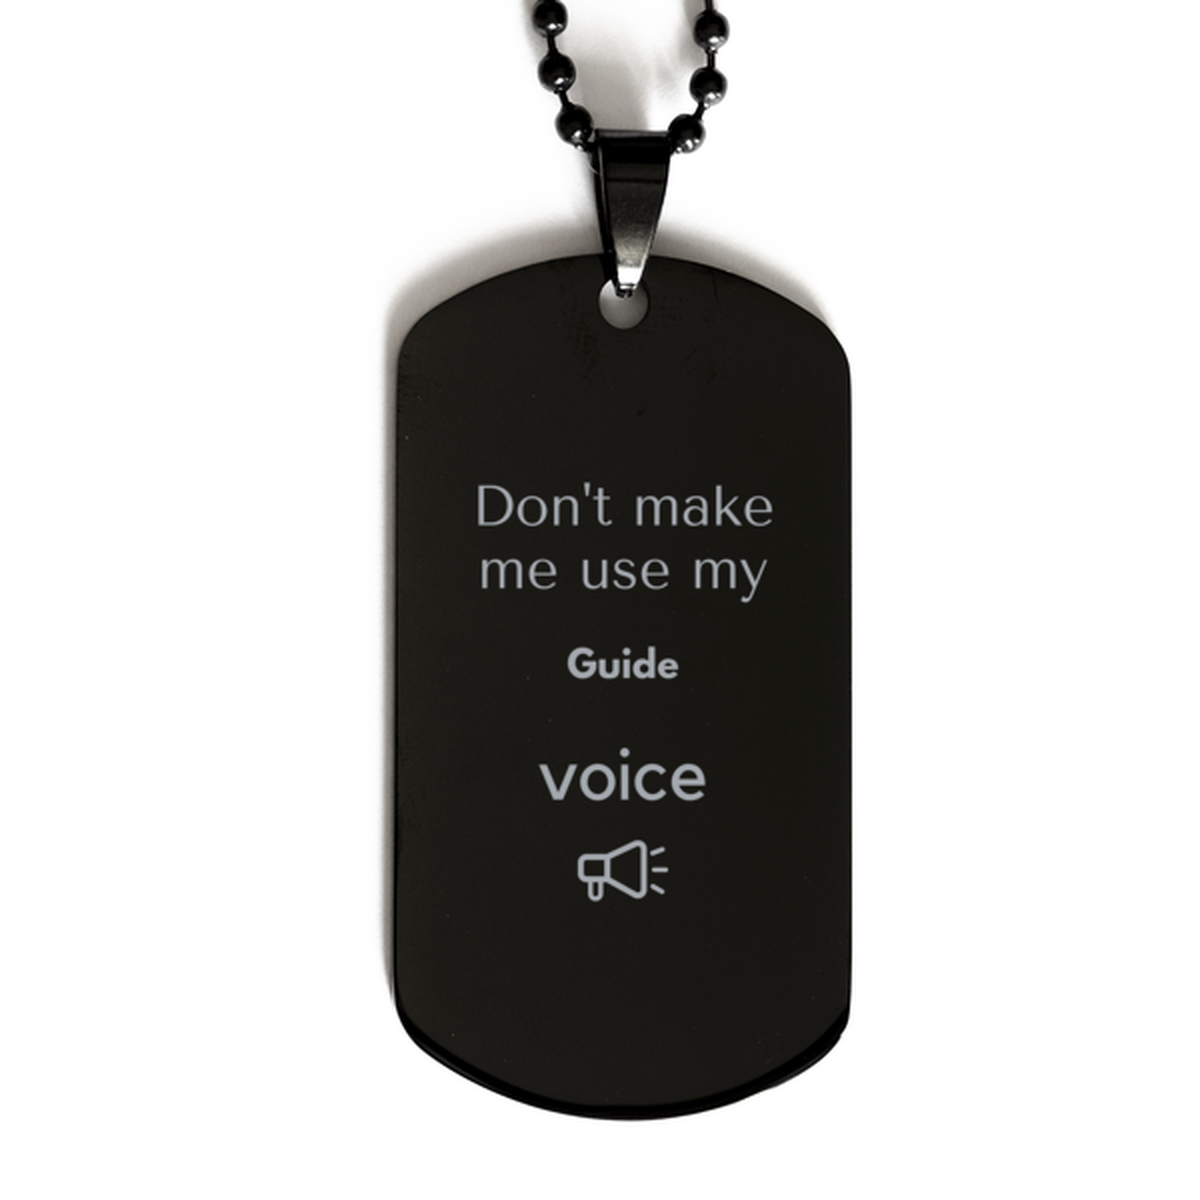 Don't make me use my Guide voice, Sarcasm Guide Gifts, Christmas Guide Black Dog Tag Birthday Unique Gifts For Guide Coworkers, Men, Women, Colleague, Friends